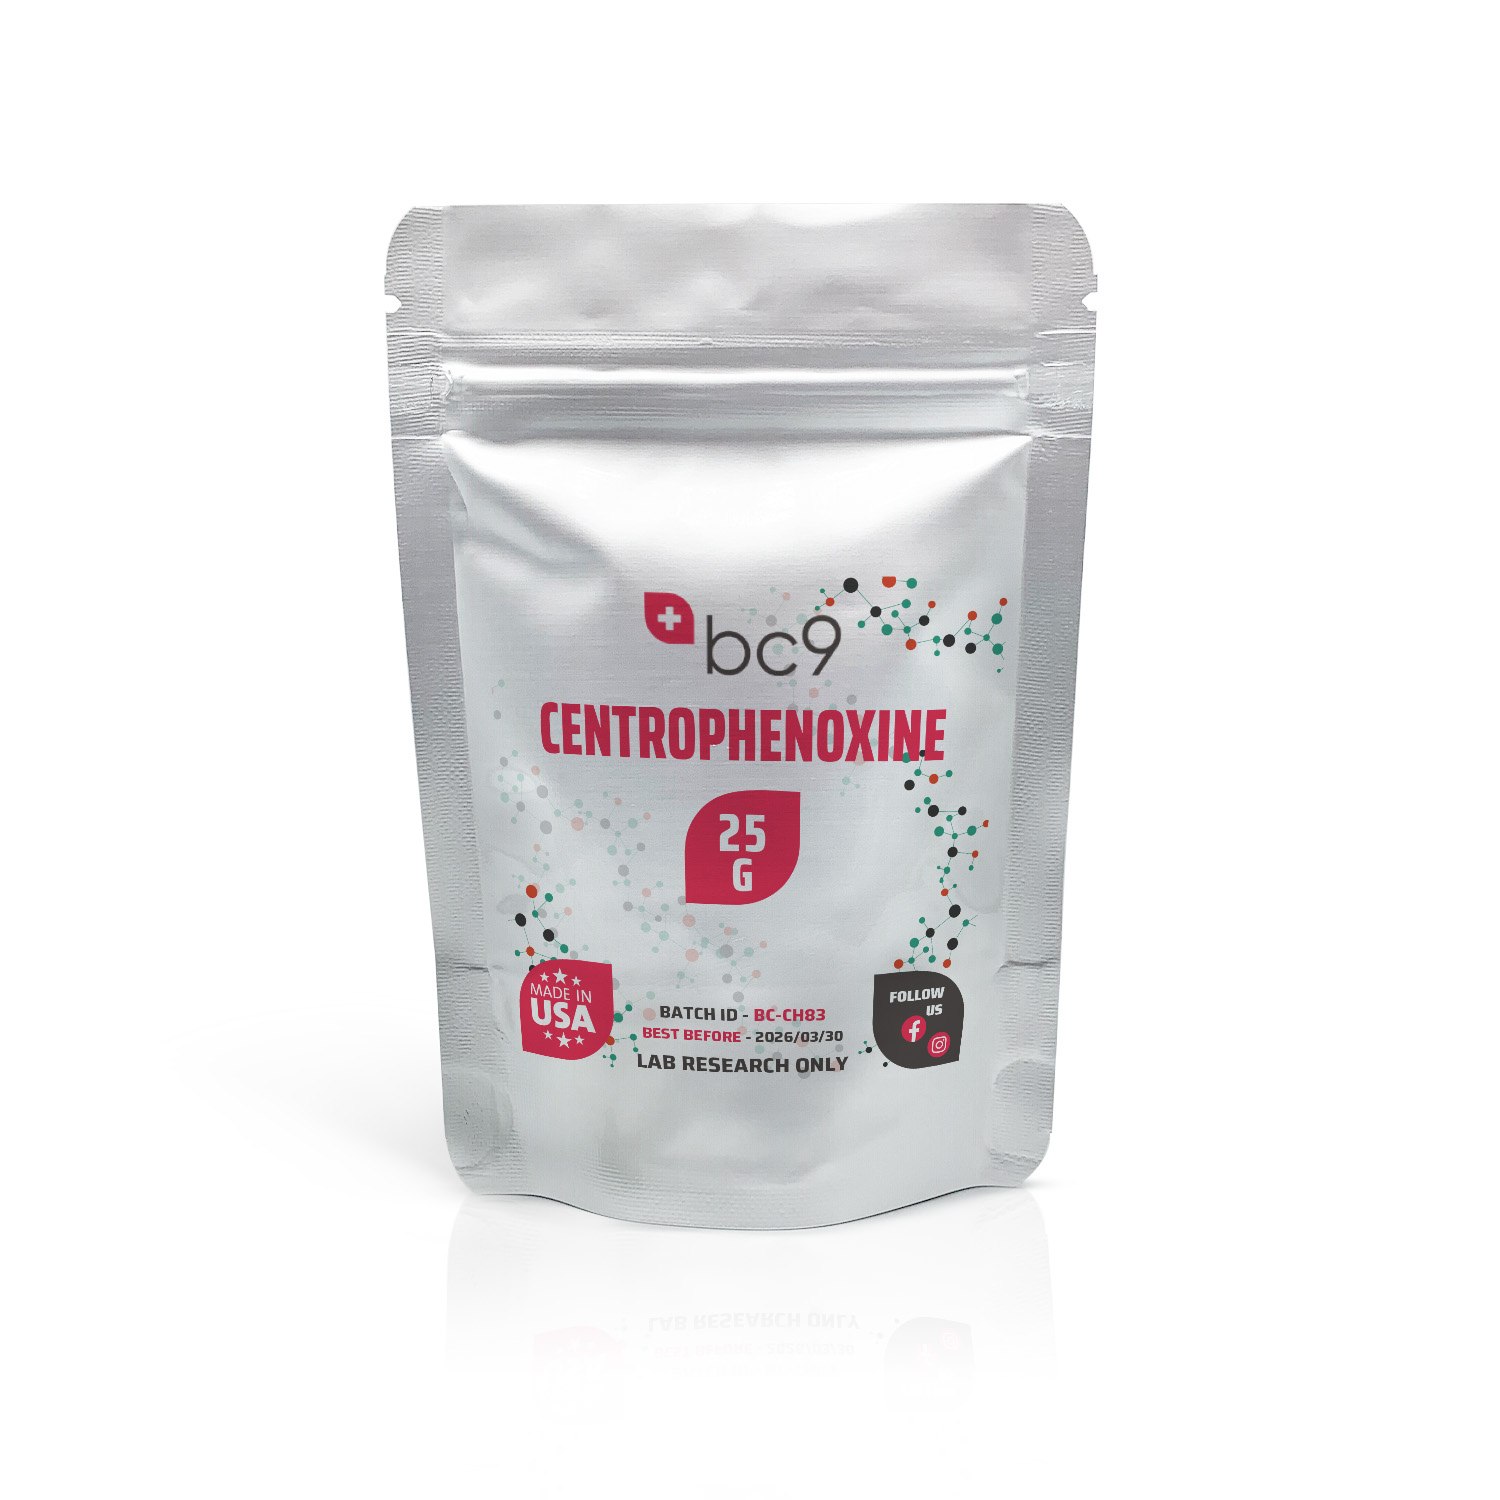 Centrophenoxine Powder For Sale | Fast Shipping | BC9.org